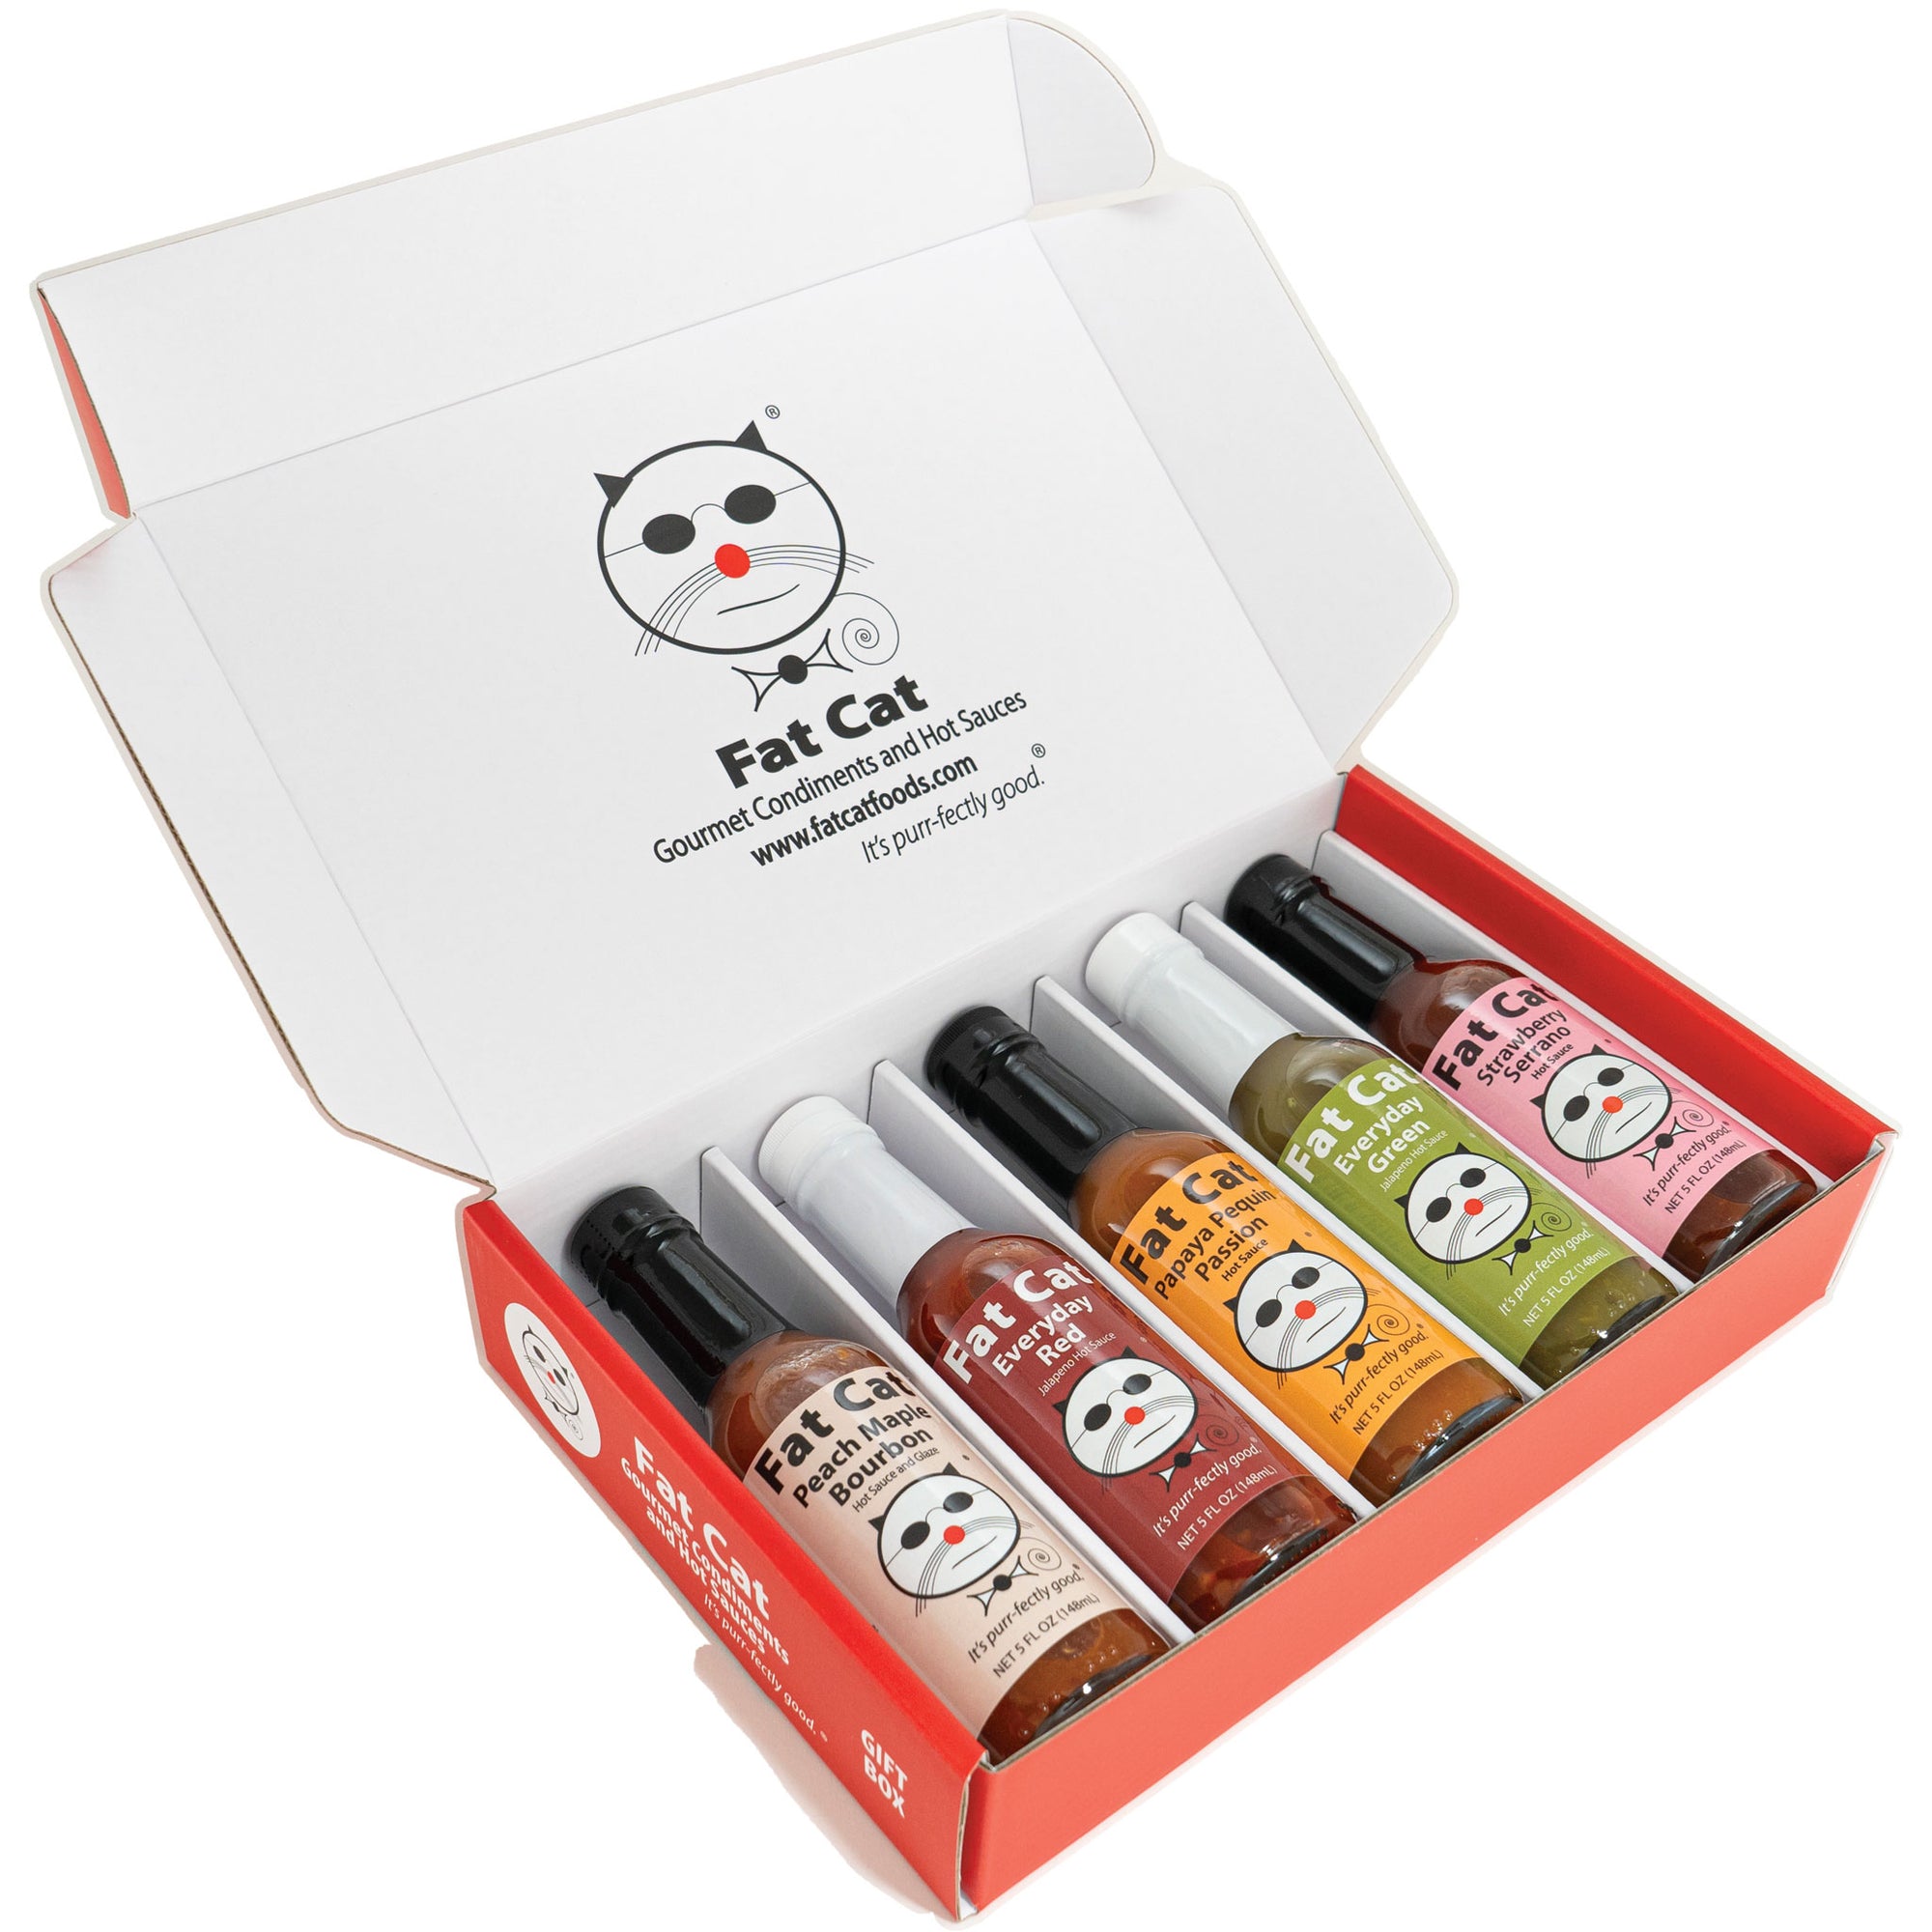 Create Your Own 5-Bottle Hot Sauce Gift Box - Fat Cat Gourmet Hot Sauce & Specialty Condiments